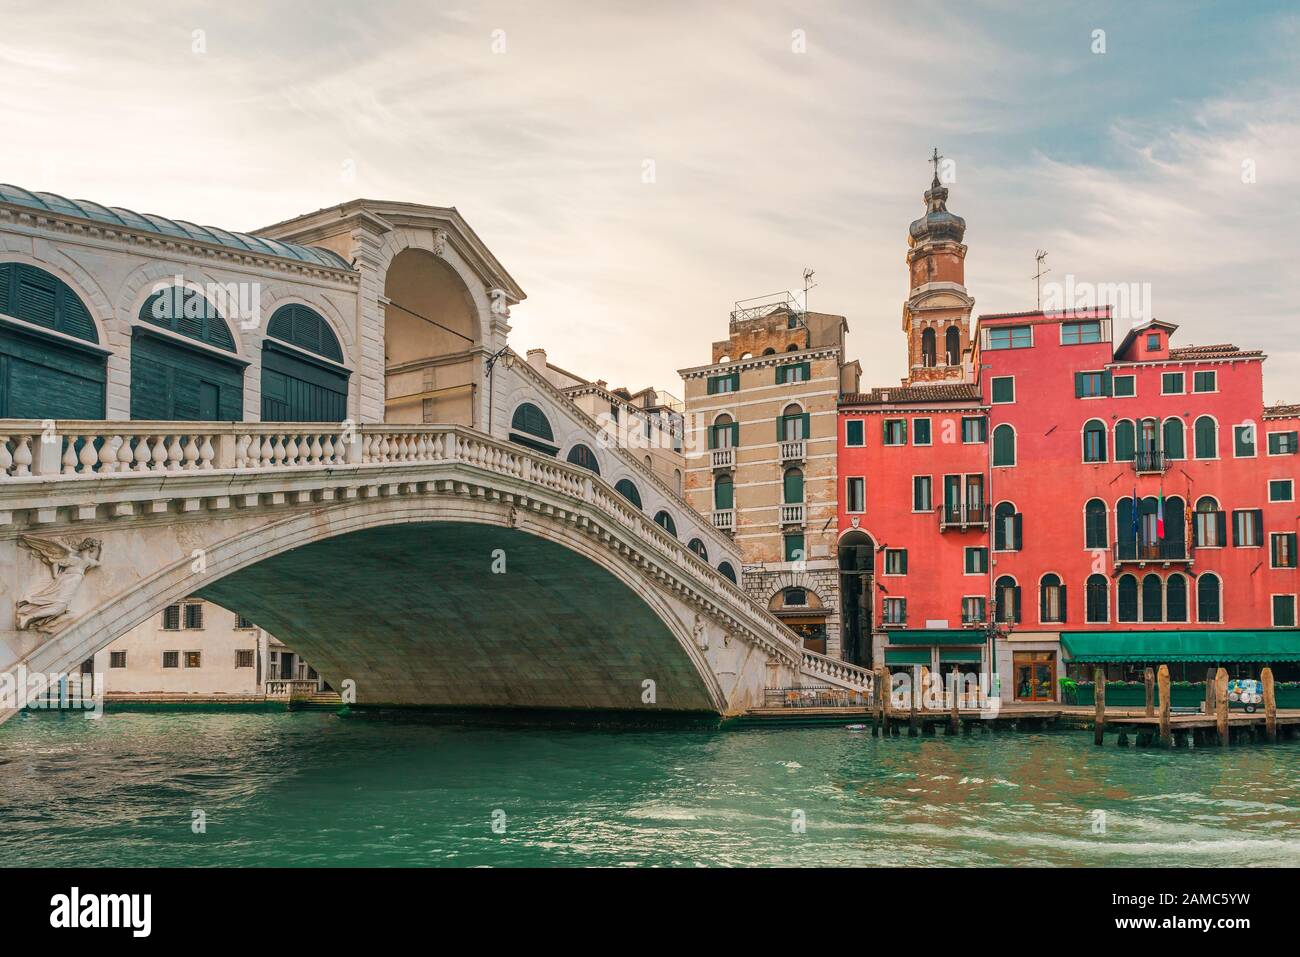 Rialto bridge on the Grand canal of Venice city with colorful architecture with nobody, Veneto, Italy during sunrise Stock Photo